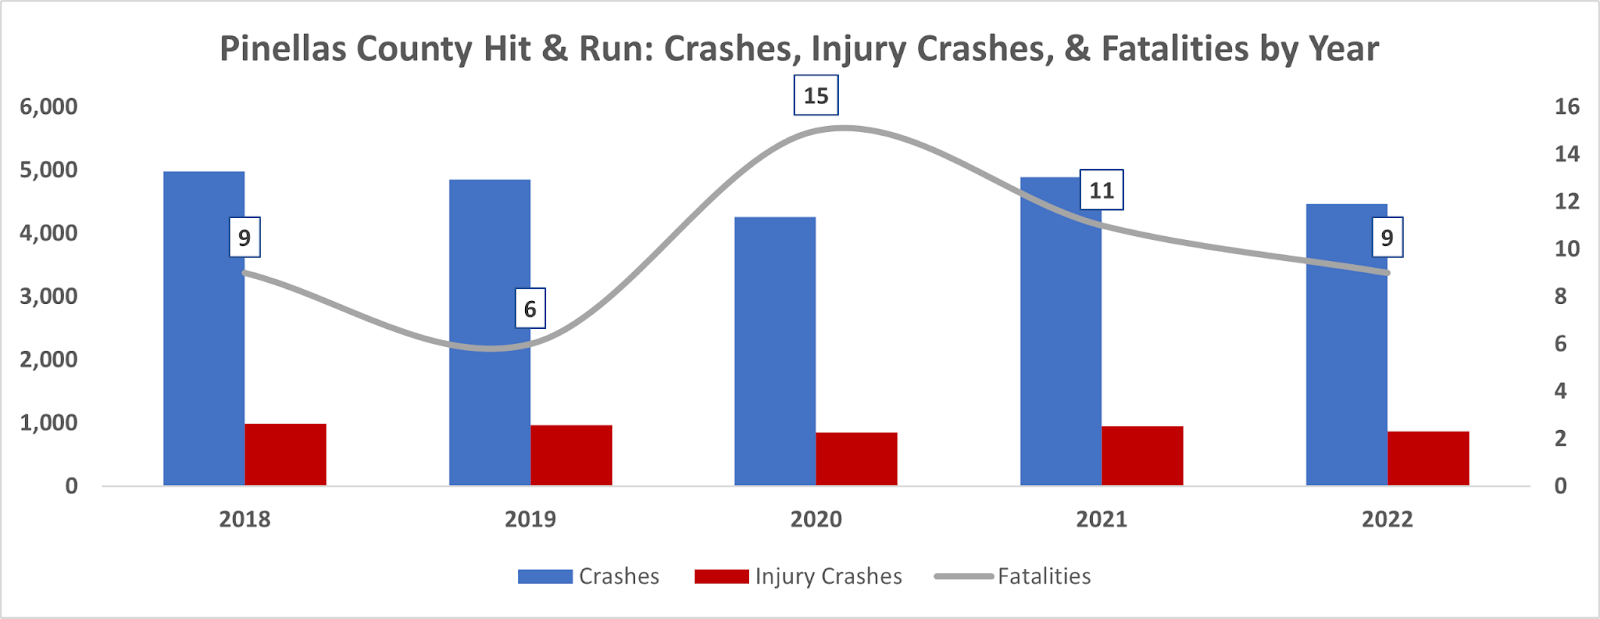 Graph of Pinellas County hit & run crashes, injuries, and fatalities by year from 2018 through 2022